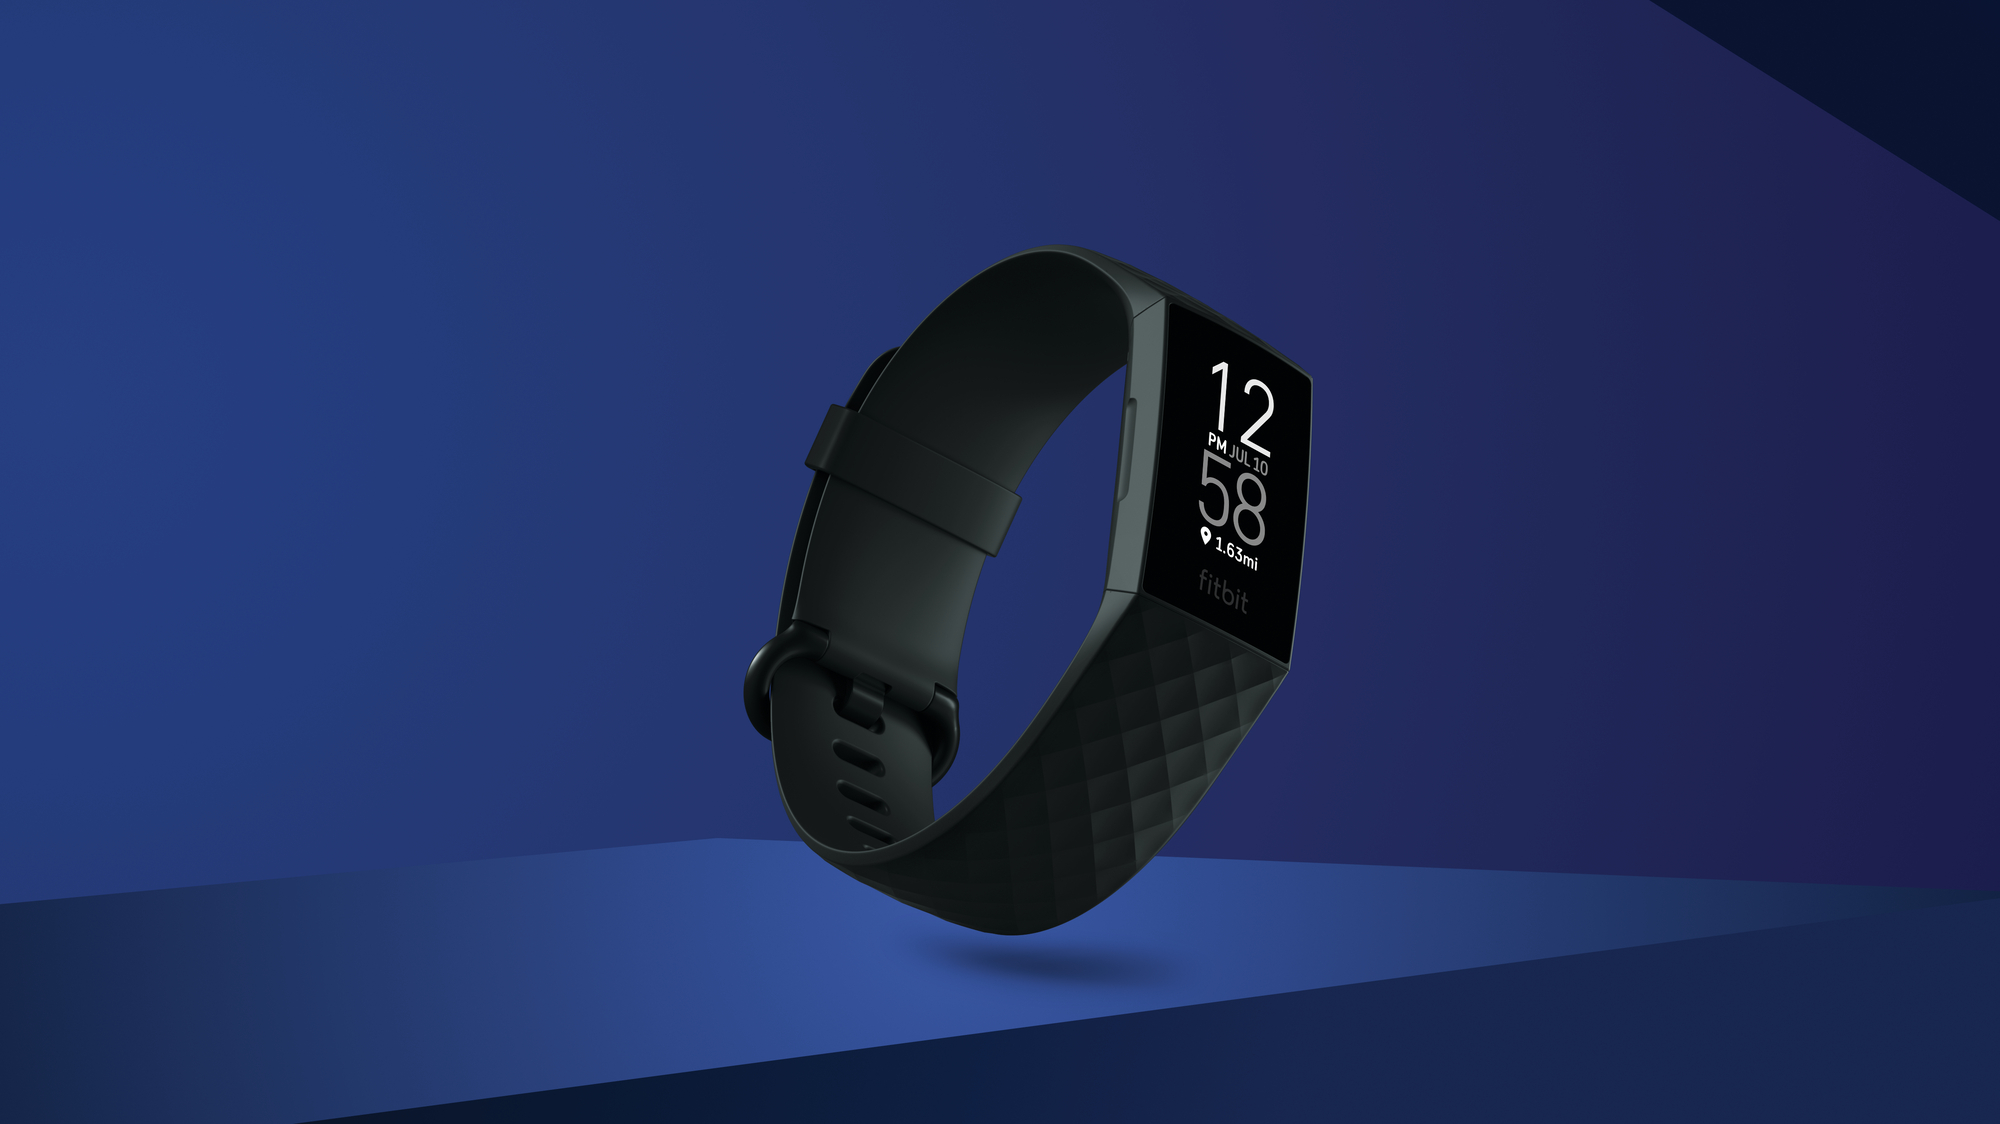 Product laydown photography for Fitbit Charge 4.